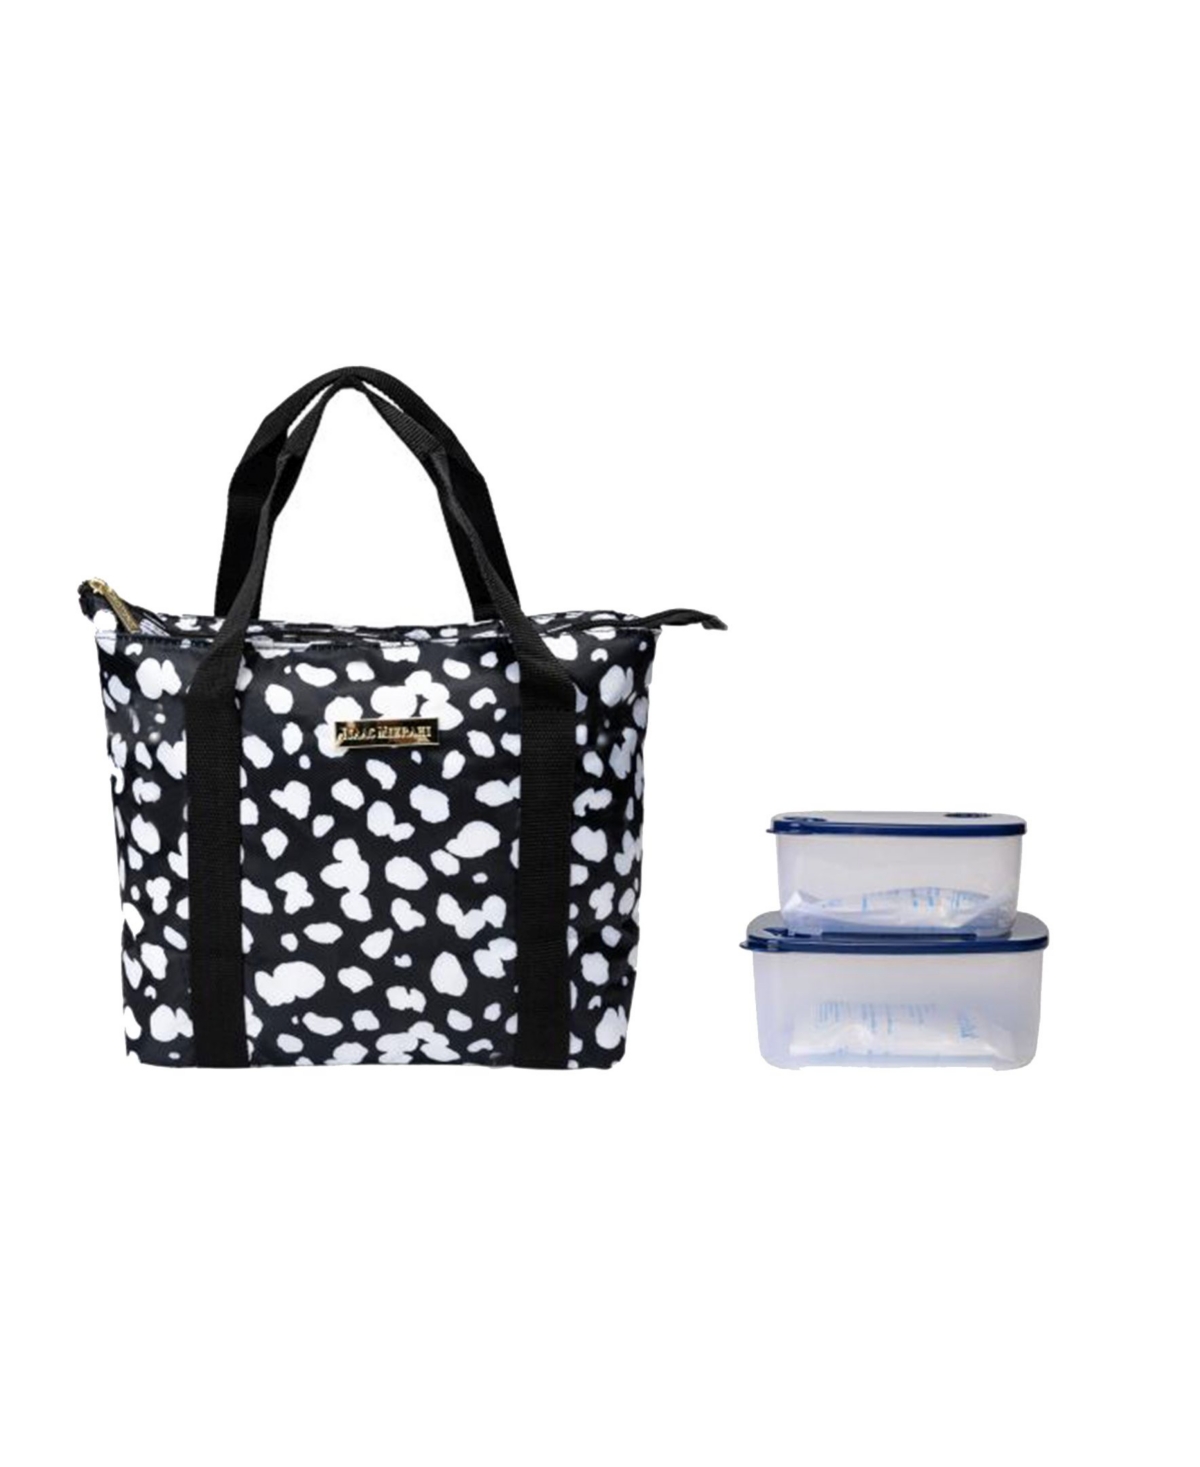 Griggs Large Lunch Tote Bag, Set of 3 - Black White